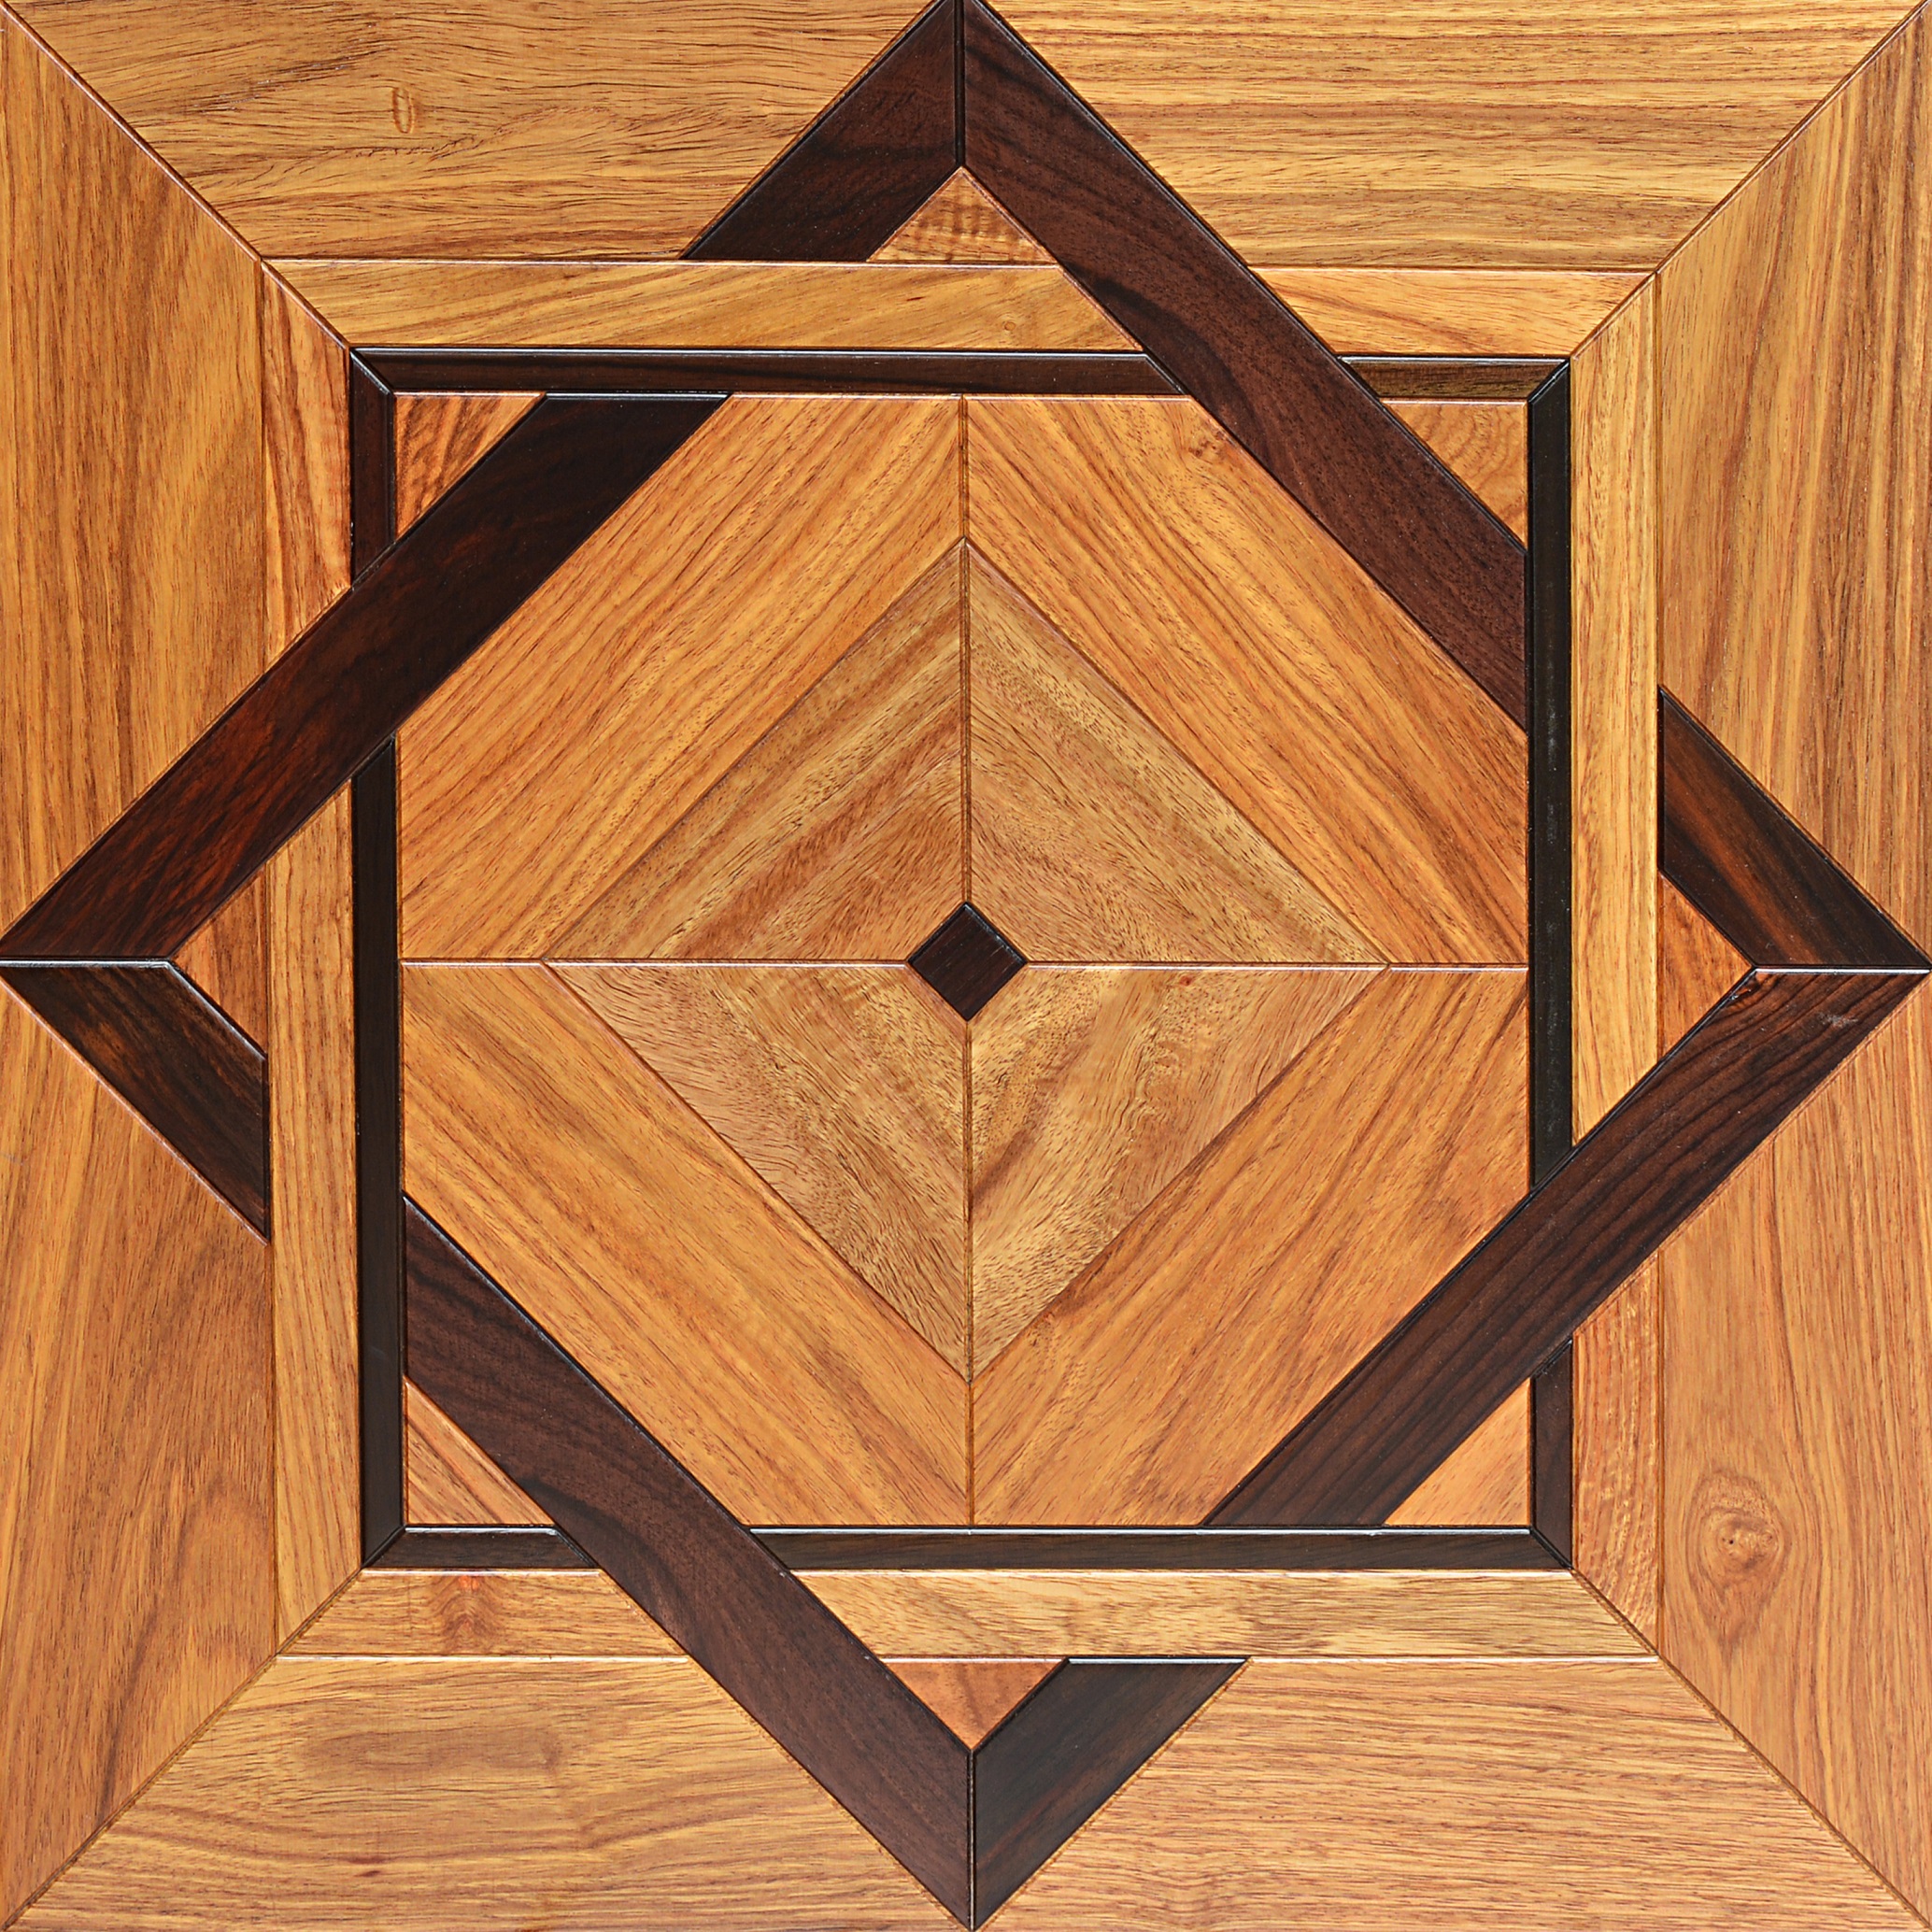 

Rosewood parquet art hardwood floor carpet woodworking rugs home decor medallion inlay wall cladding wallpaper effect finished engineered timber marquetry tile